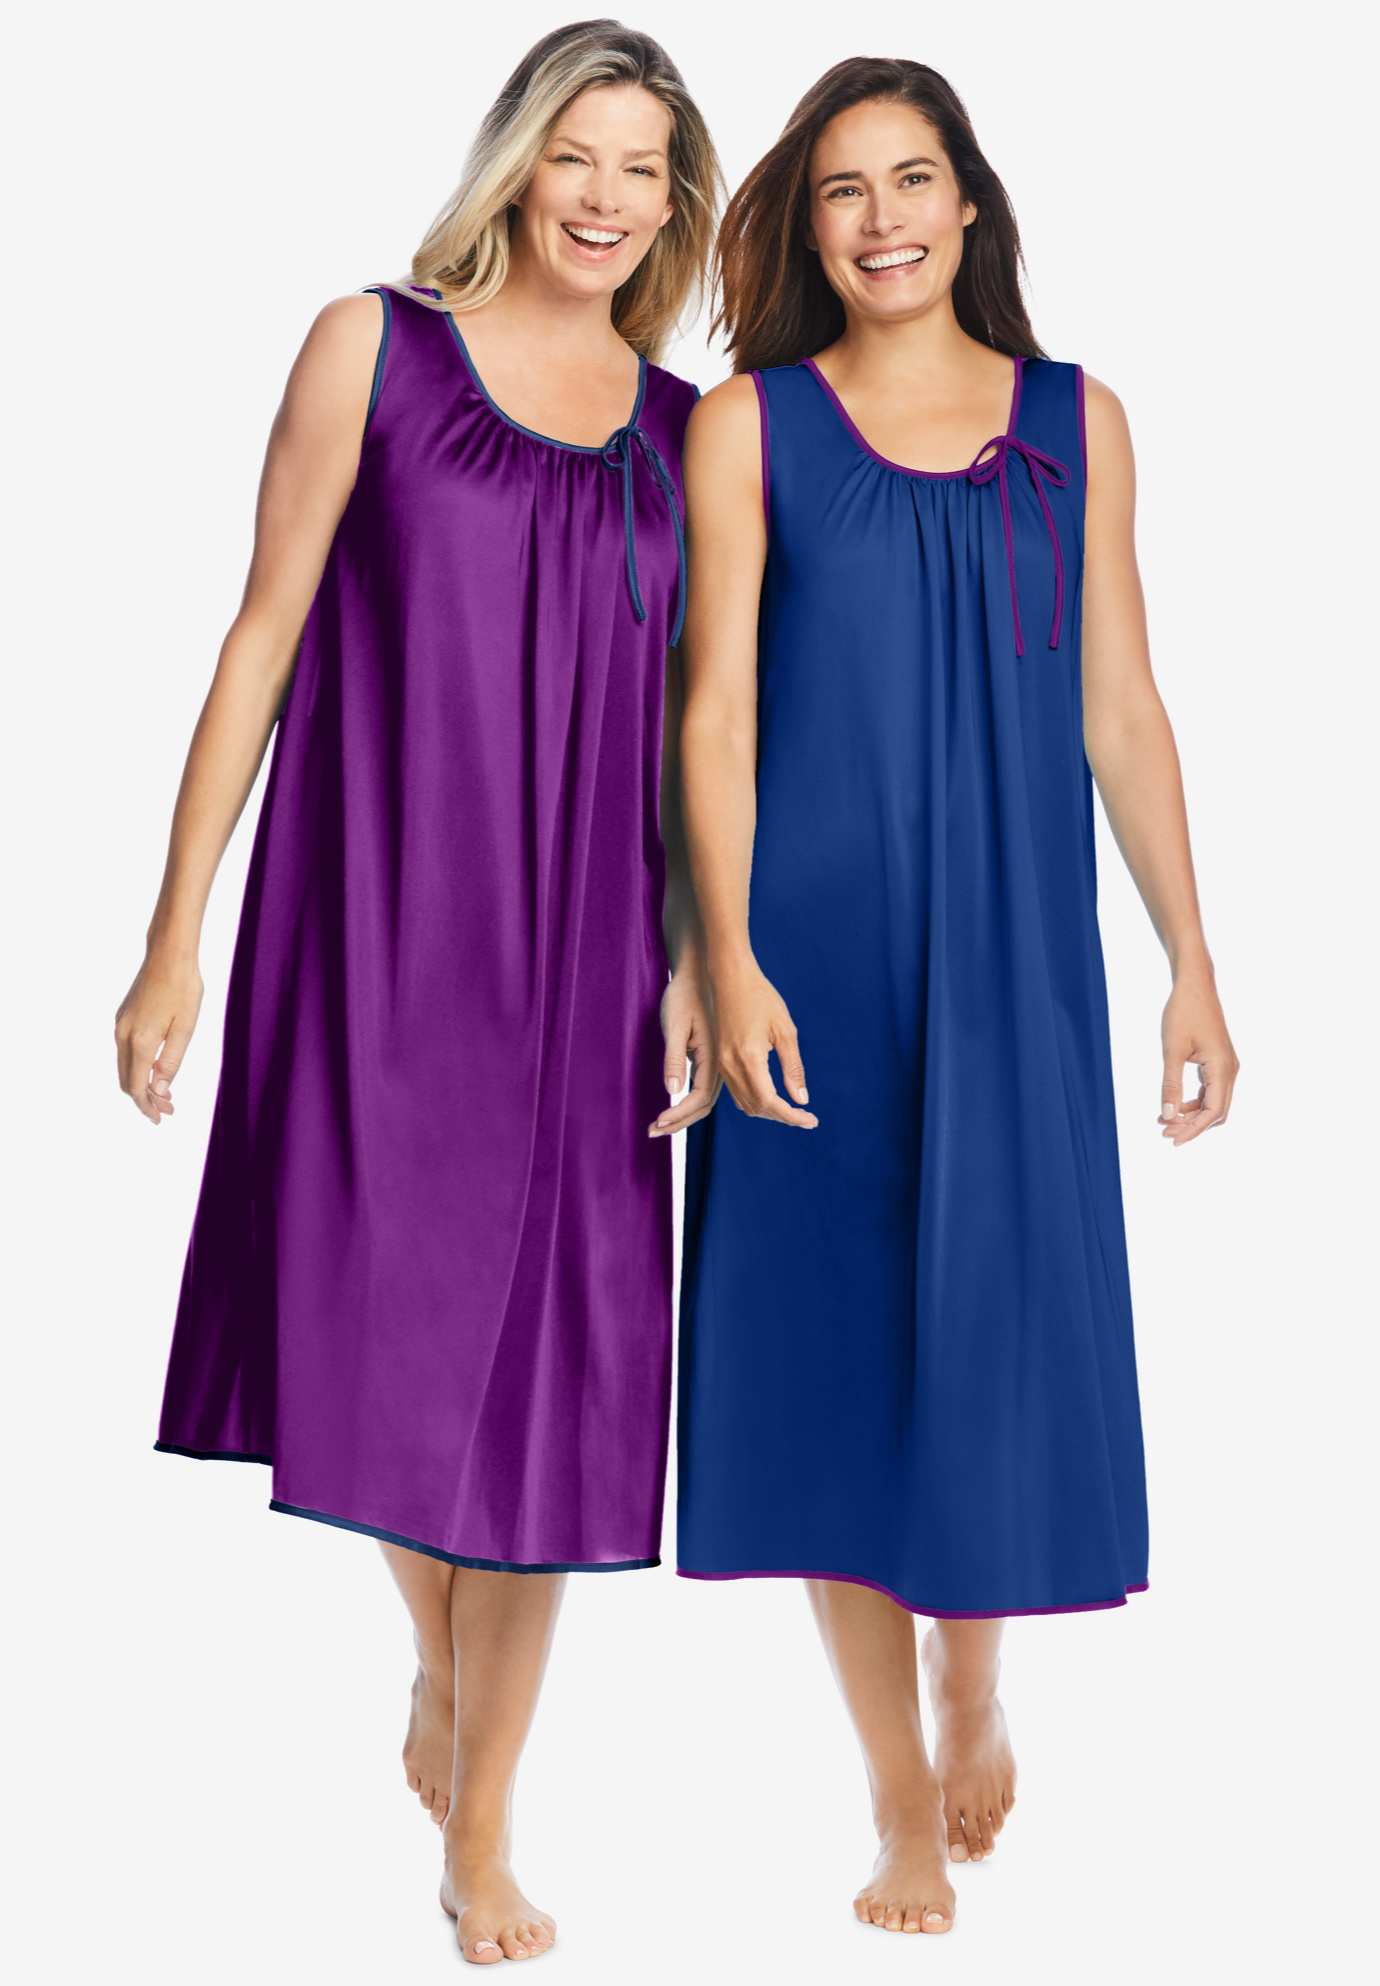 2-Pack Sleeveless Nightgown by Only Necessities®| Plus Size Nightgowns